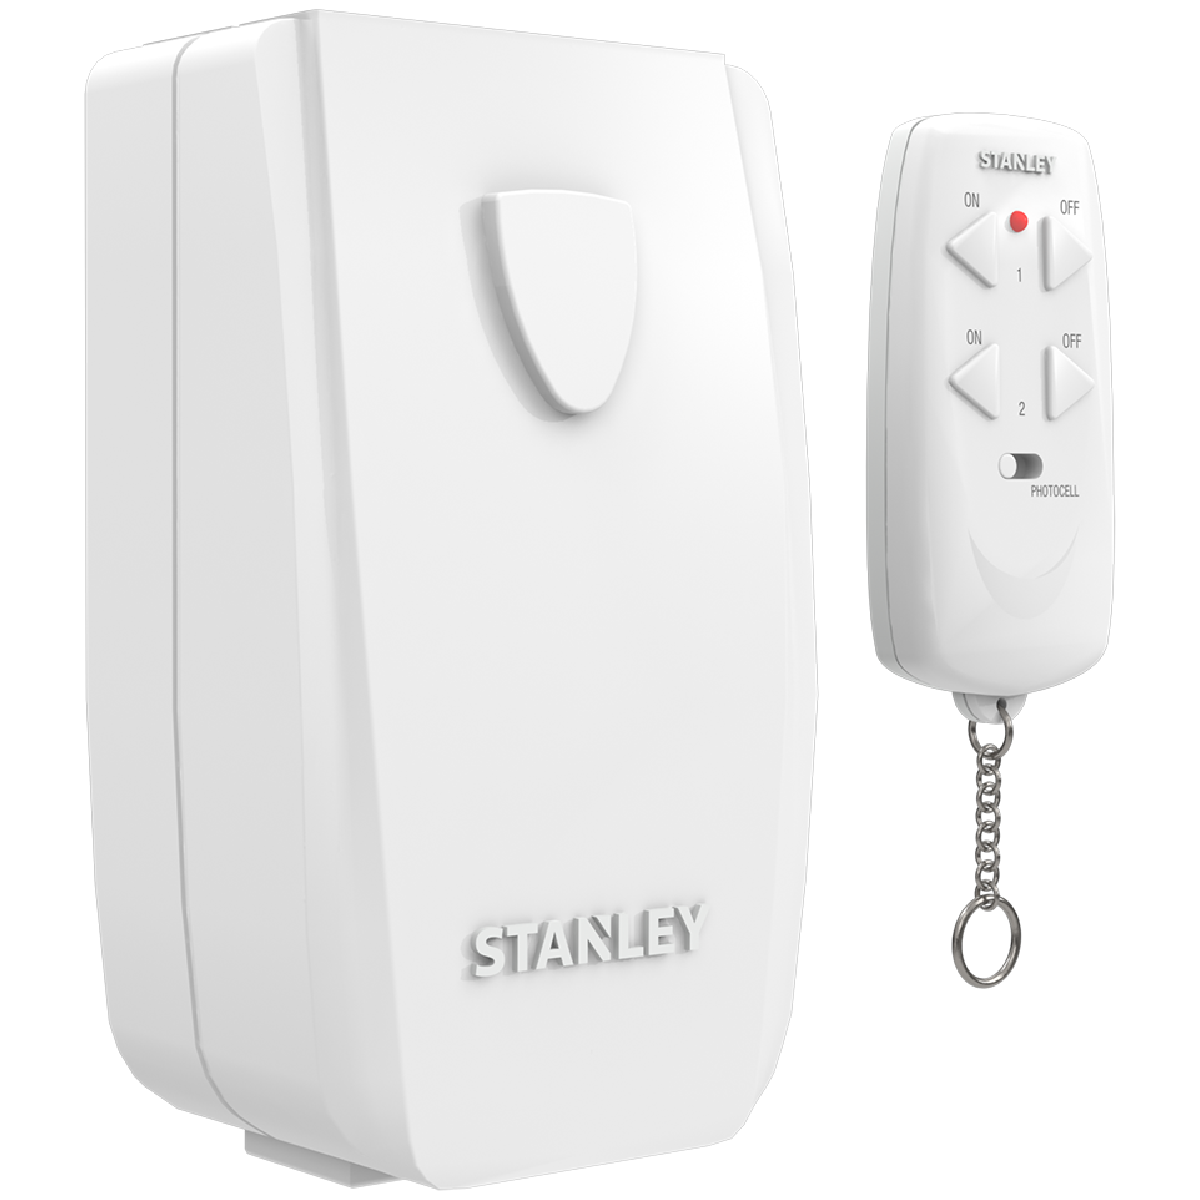 STANLEY Wireless Remote System 5+2 Pack, Case of 12 – thenccdirect